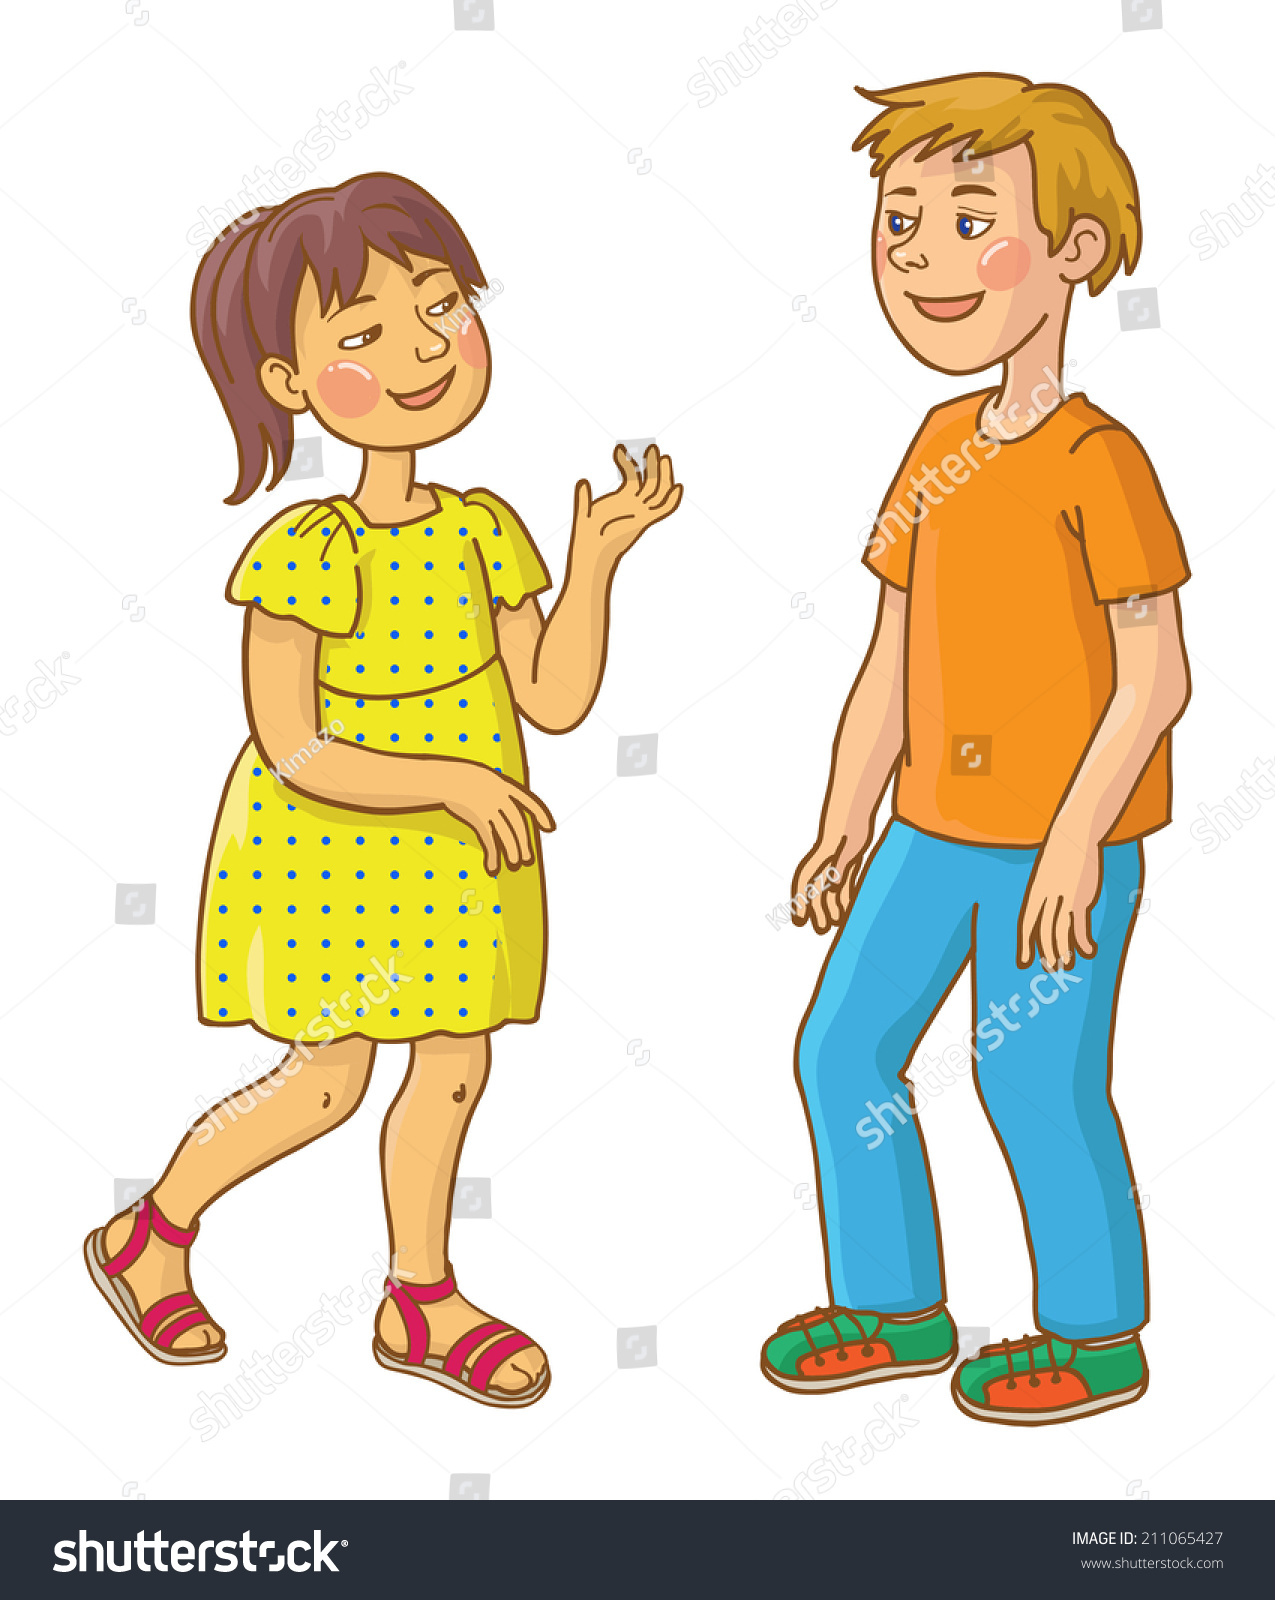 clipart boy and girl talking - photo #14